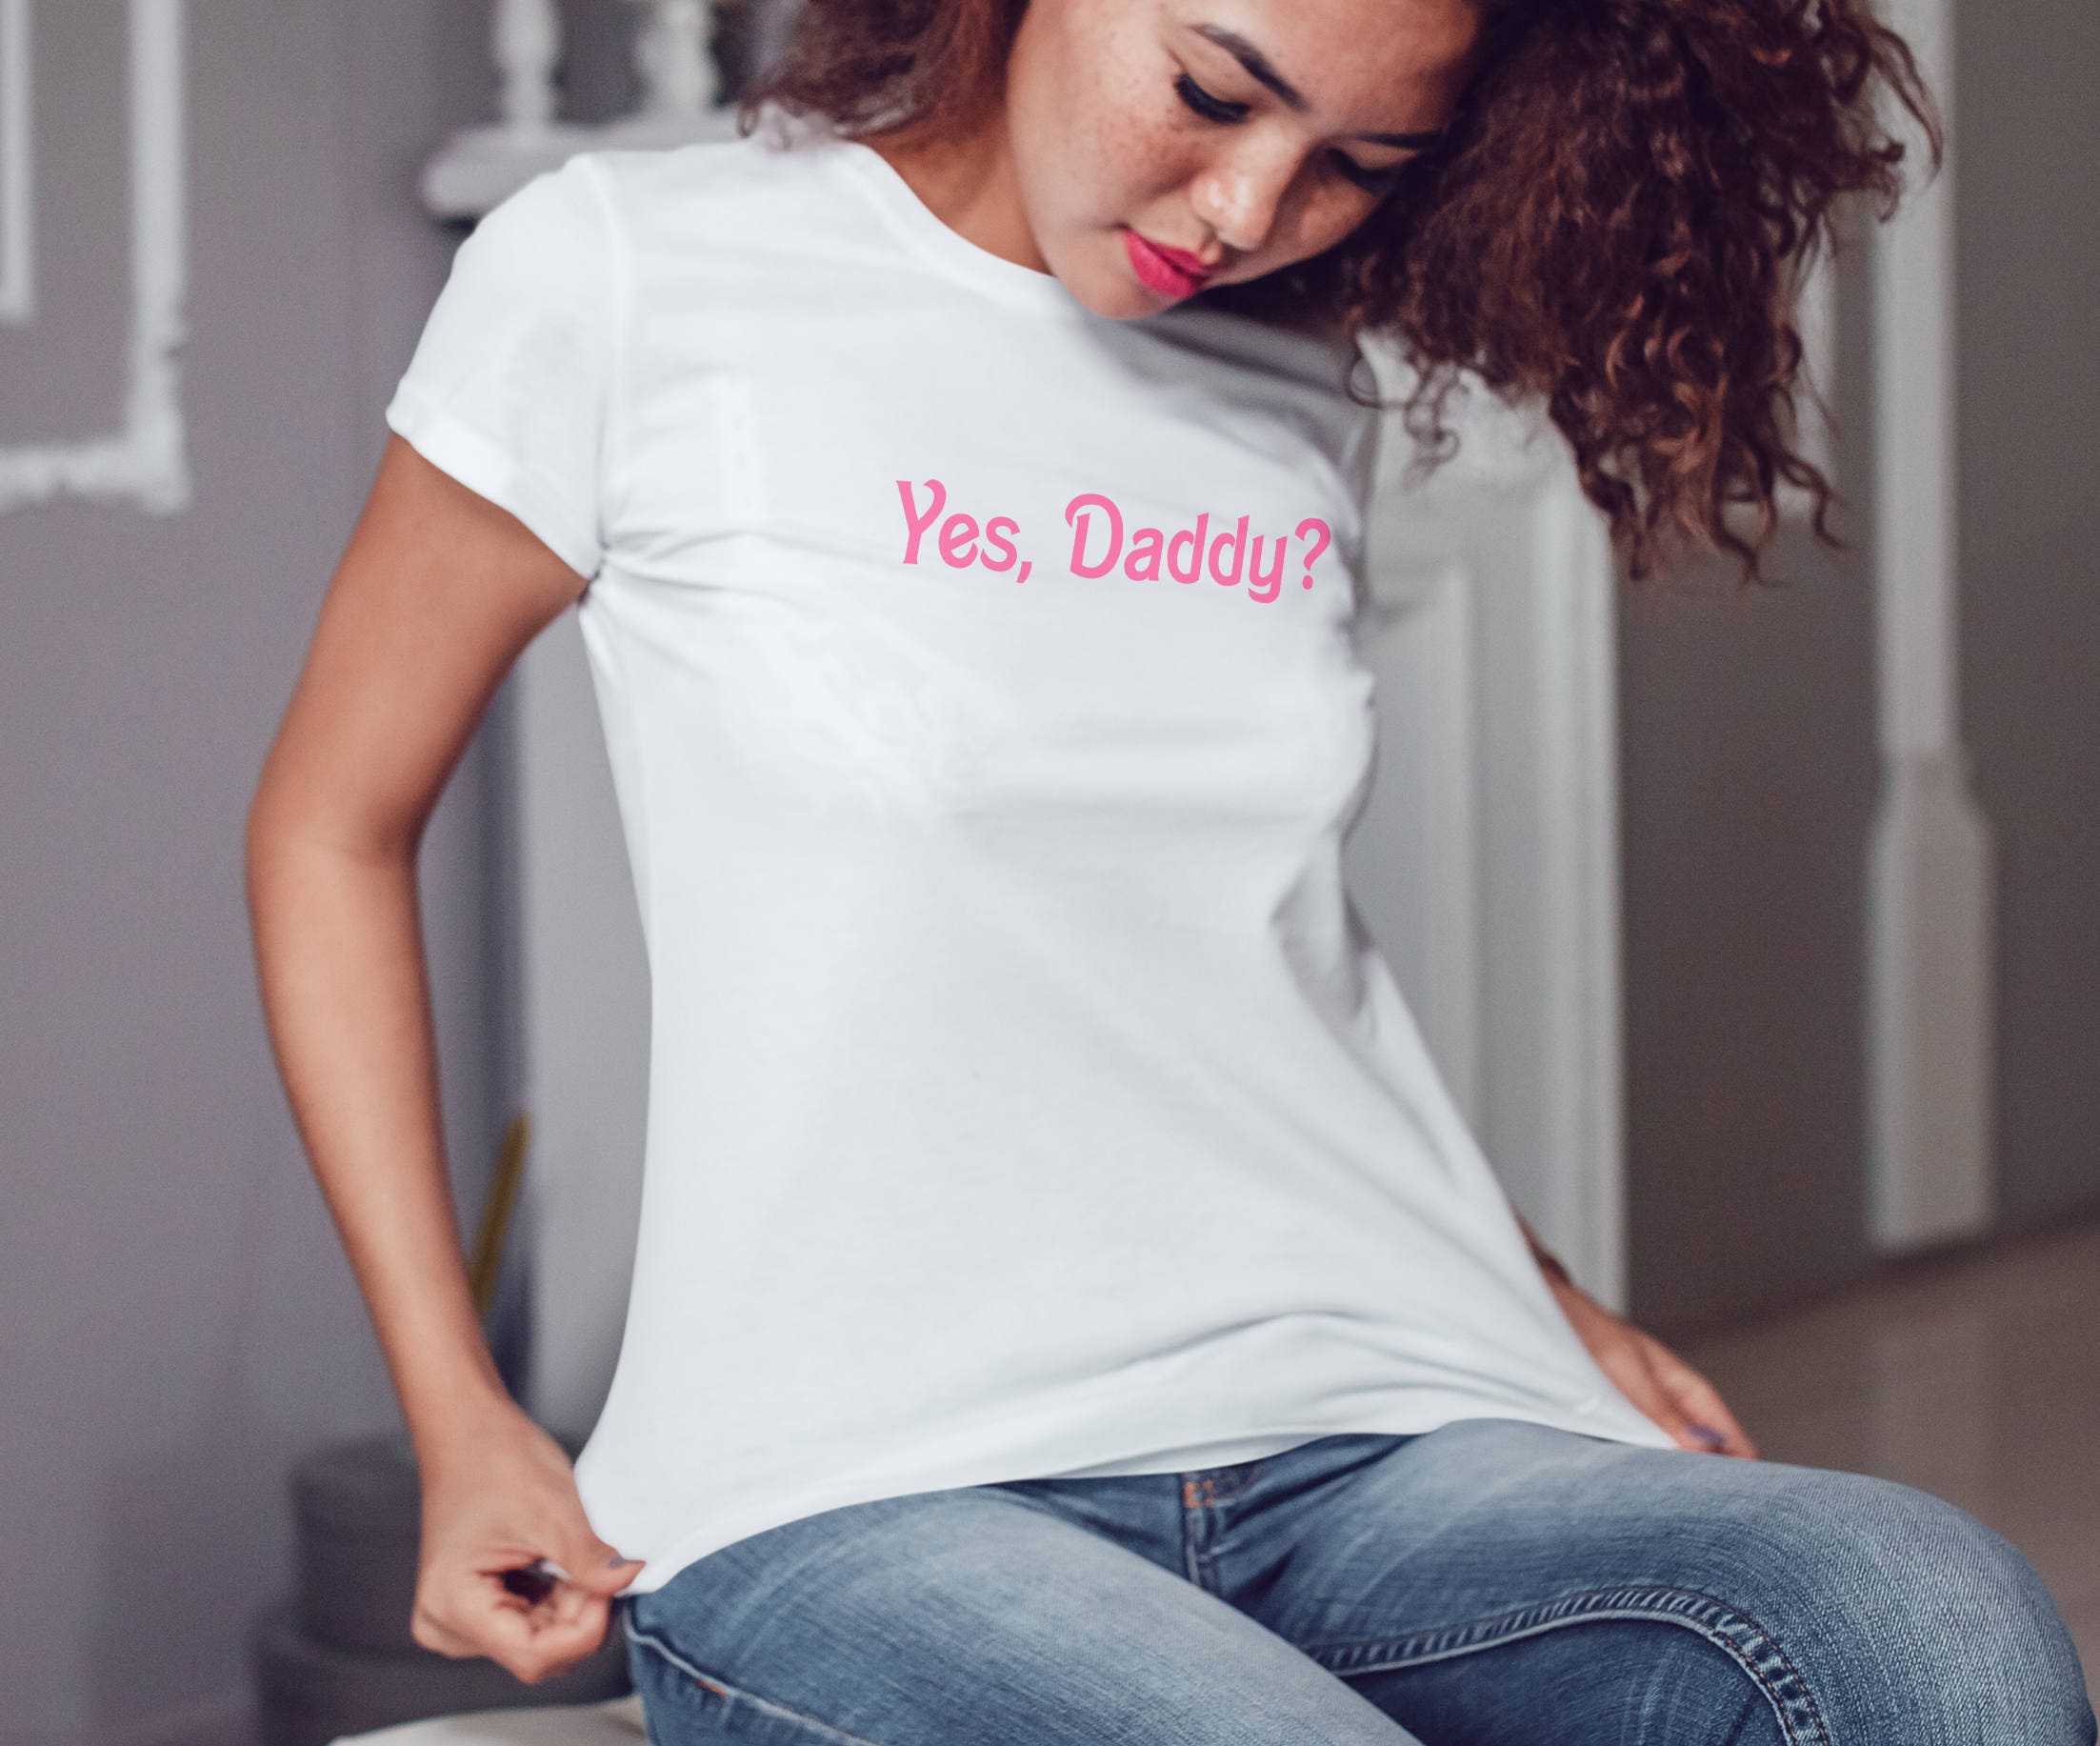 Hovedkvarter Skrive ud tage Yes Daddy? Shirt DDLG Clothing Sexy Slutty Cute Funny Submissive Naughty  Bachelorette Party Gag Gift DDLG Womens Tee Shirt